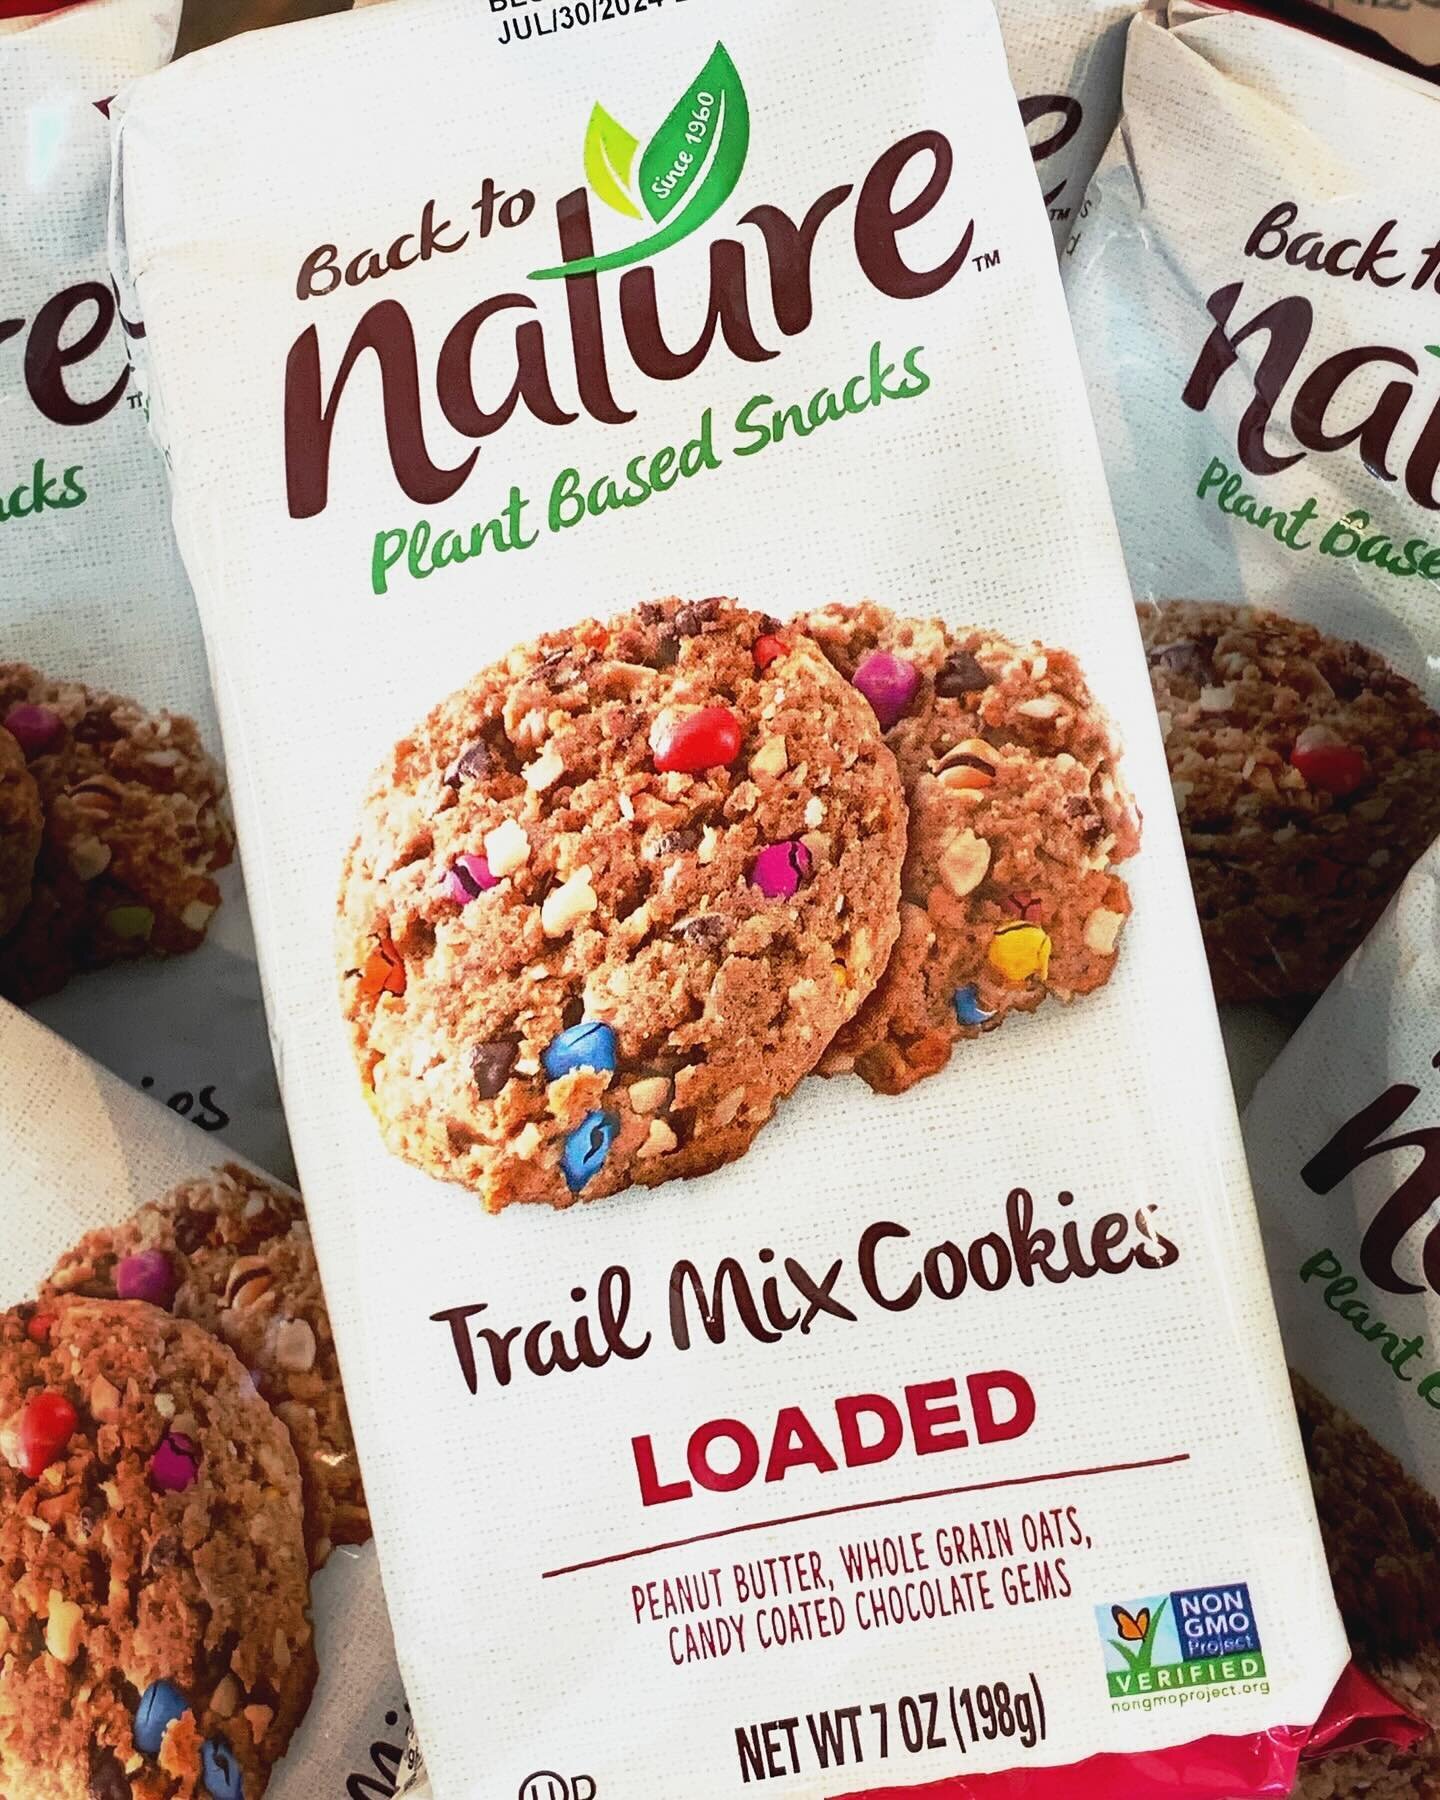 Back to Nature Loaded Trail Mix cookies aren&rsquo;t just a great snack, they&rsquo;re also a fantastic on-the-go breakfast! 🍪😋

#taylorms #oxfordms #pleinairtaylor #mississippi #backtonature